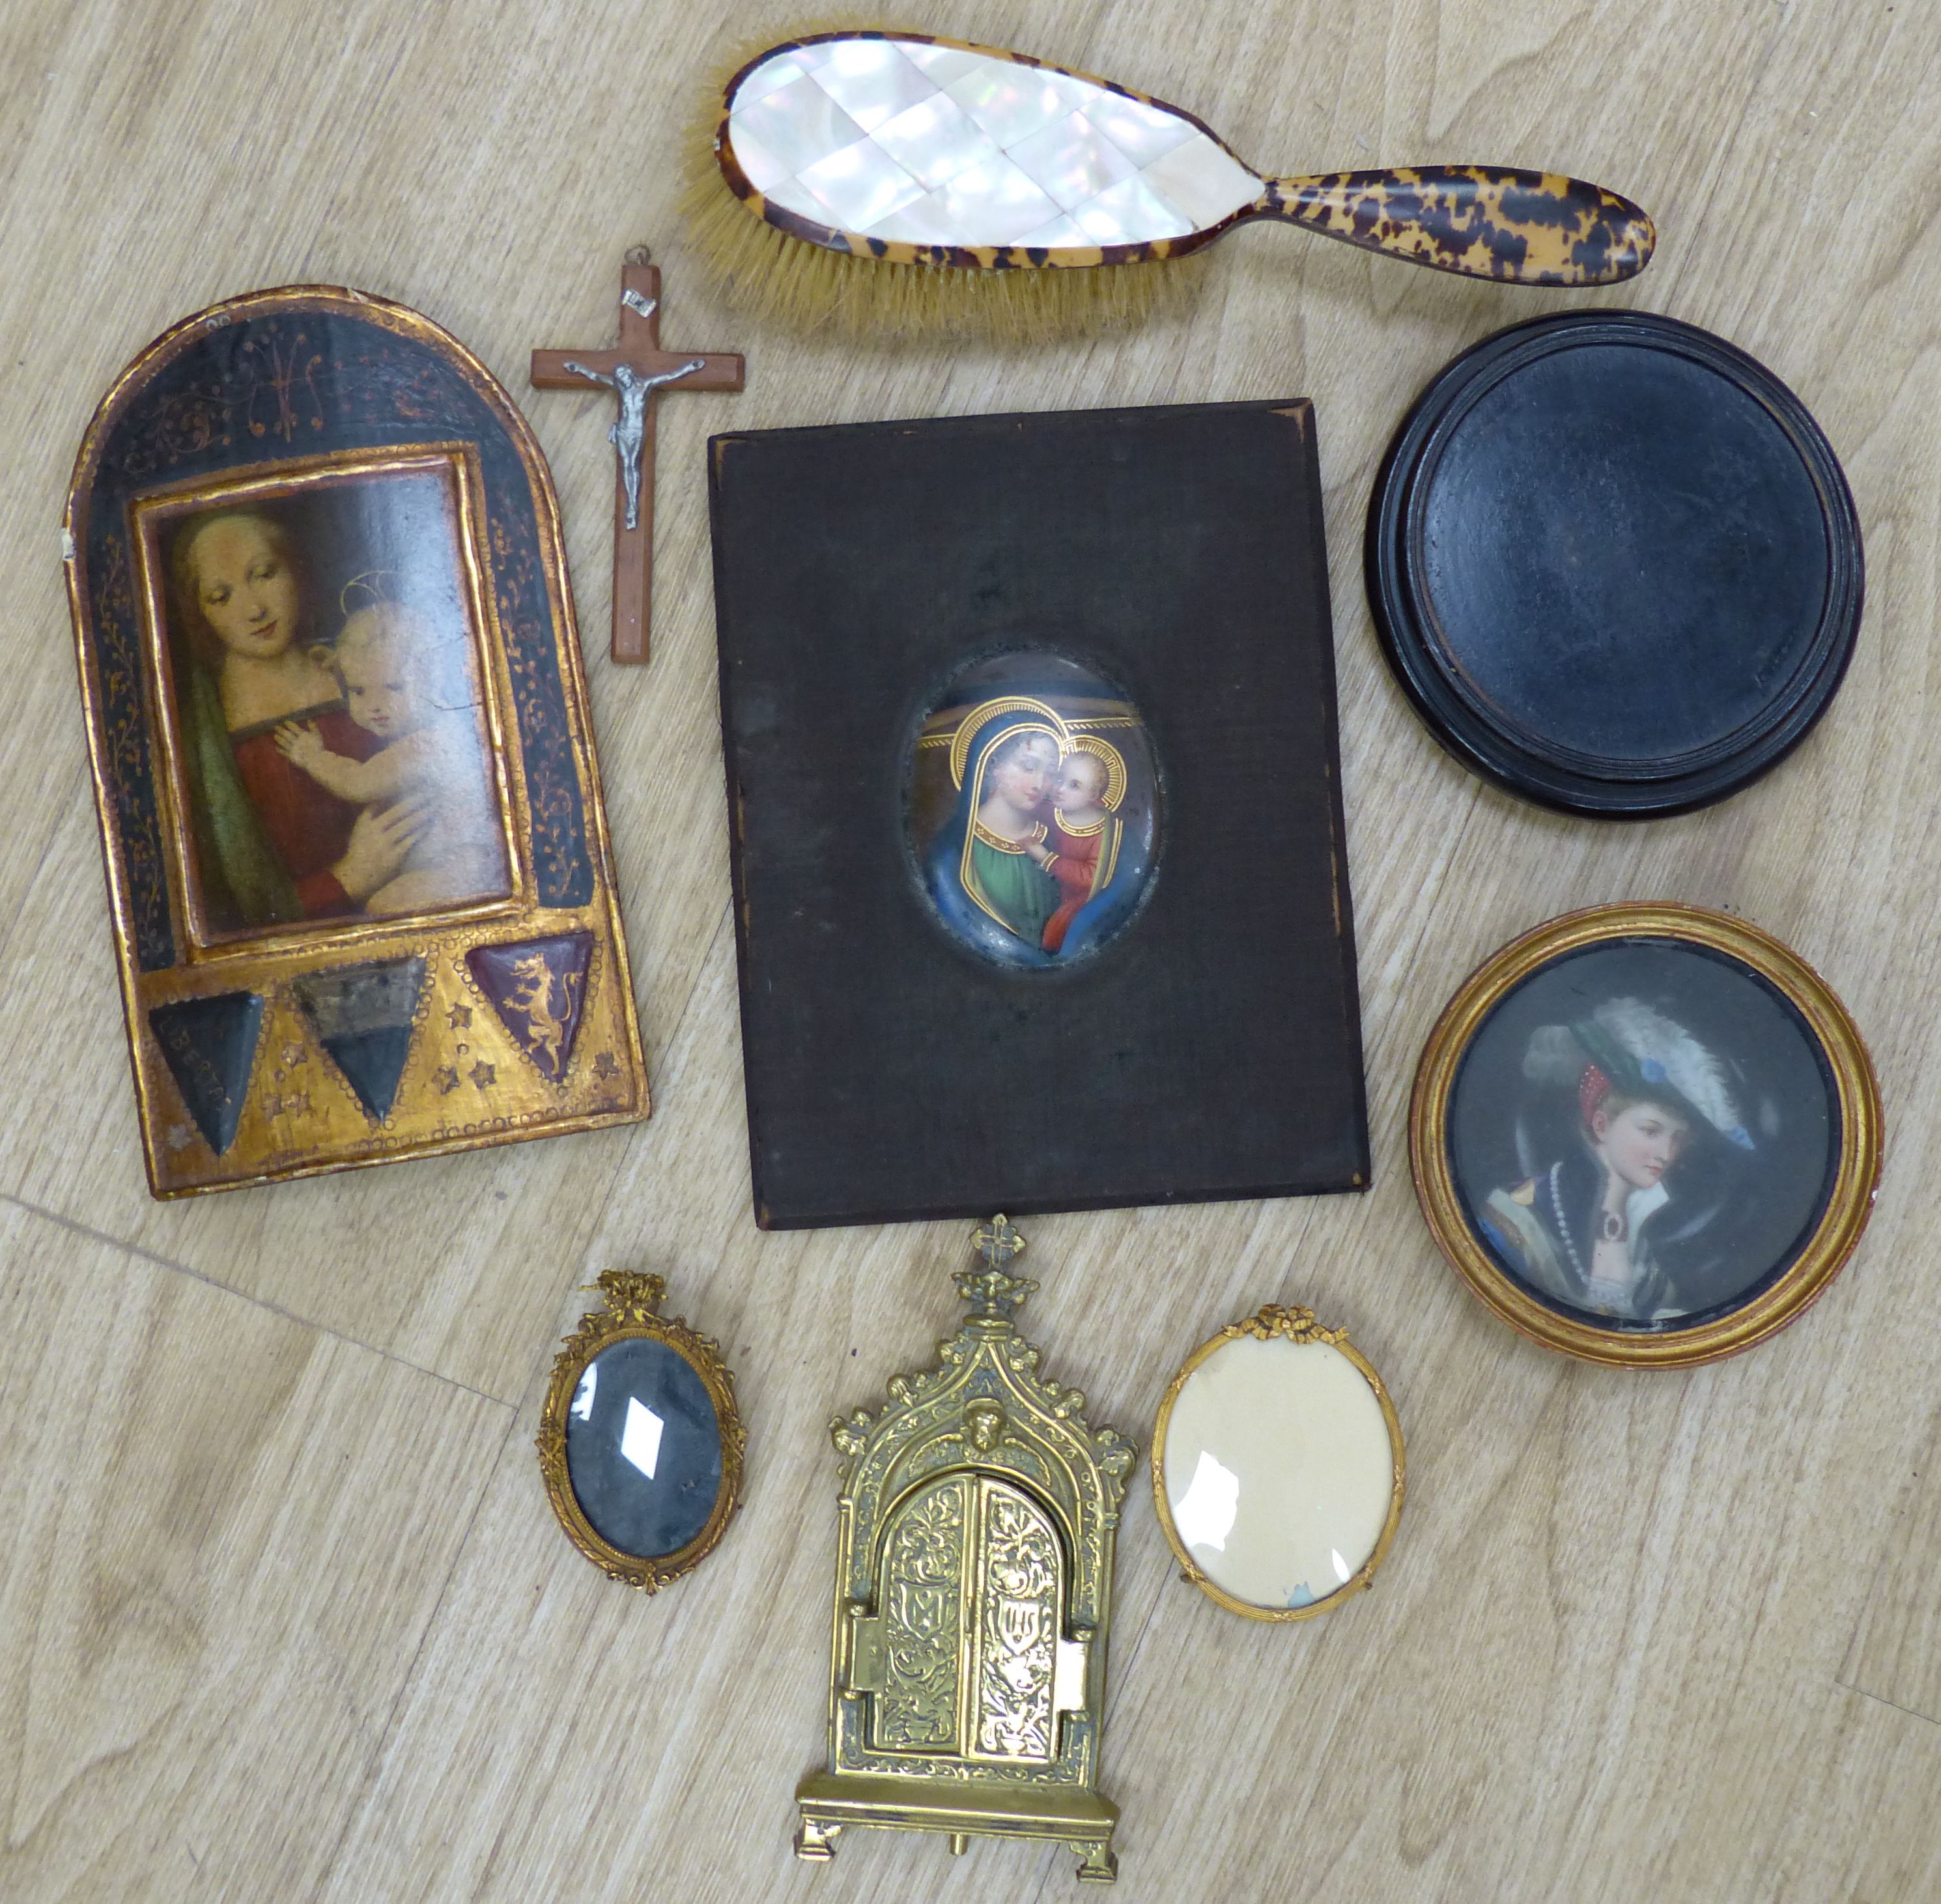 A quantity of mixed collectables to include a mother of pearl and faux tortoiseshell brush, a hardwood stand, an oval frame, a crucifix